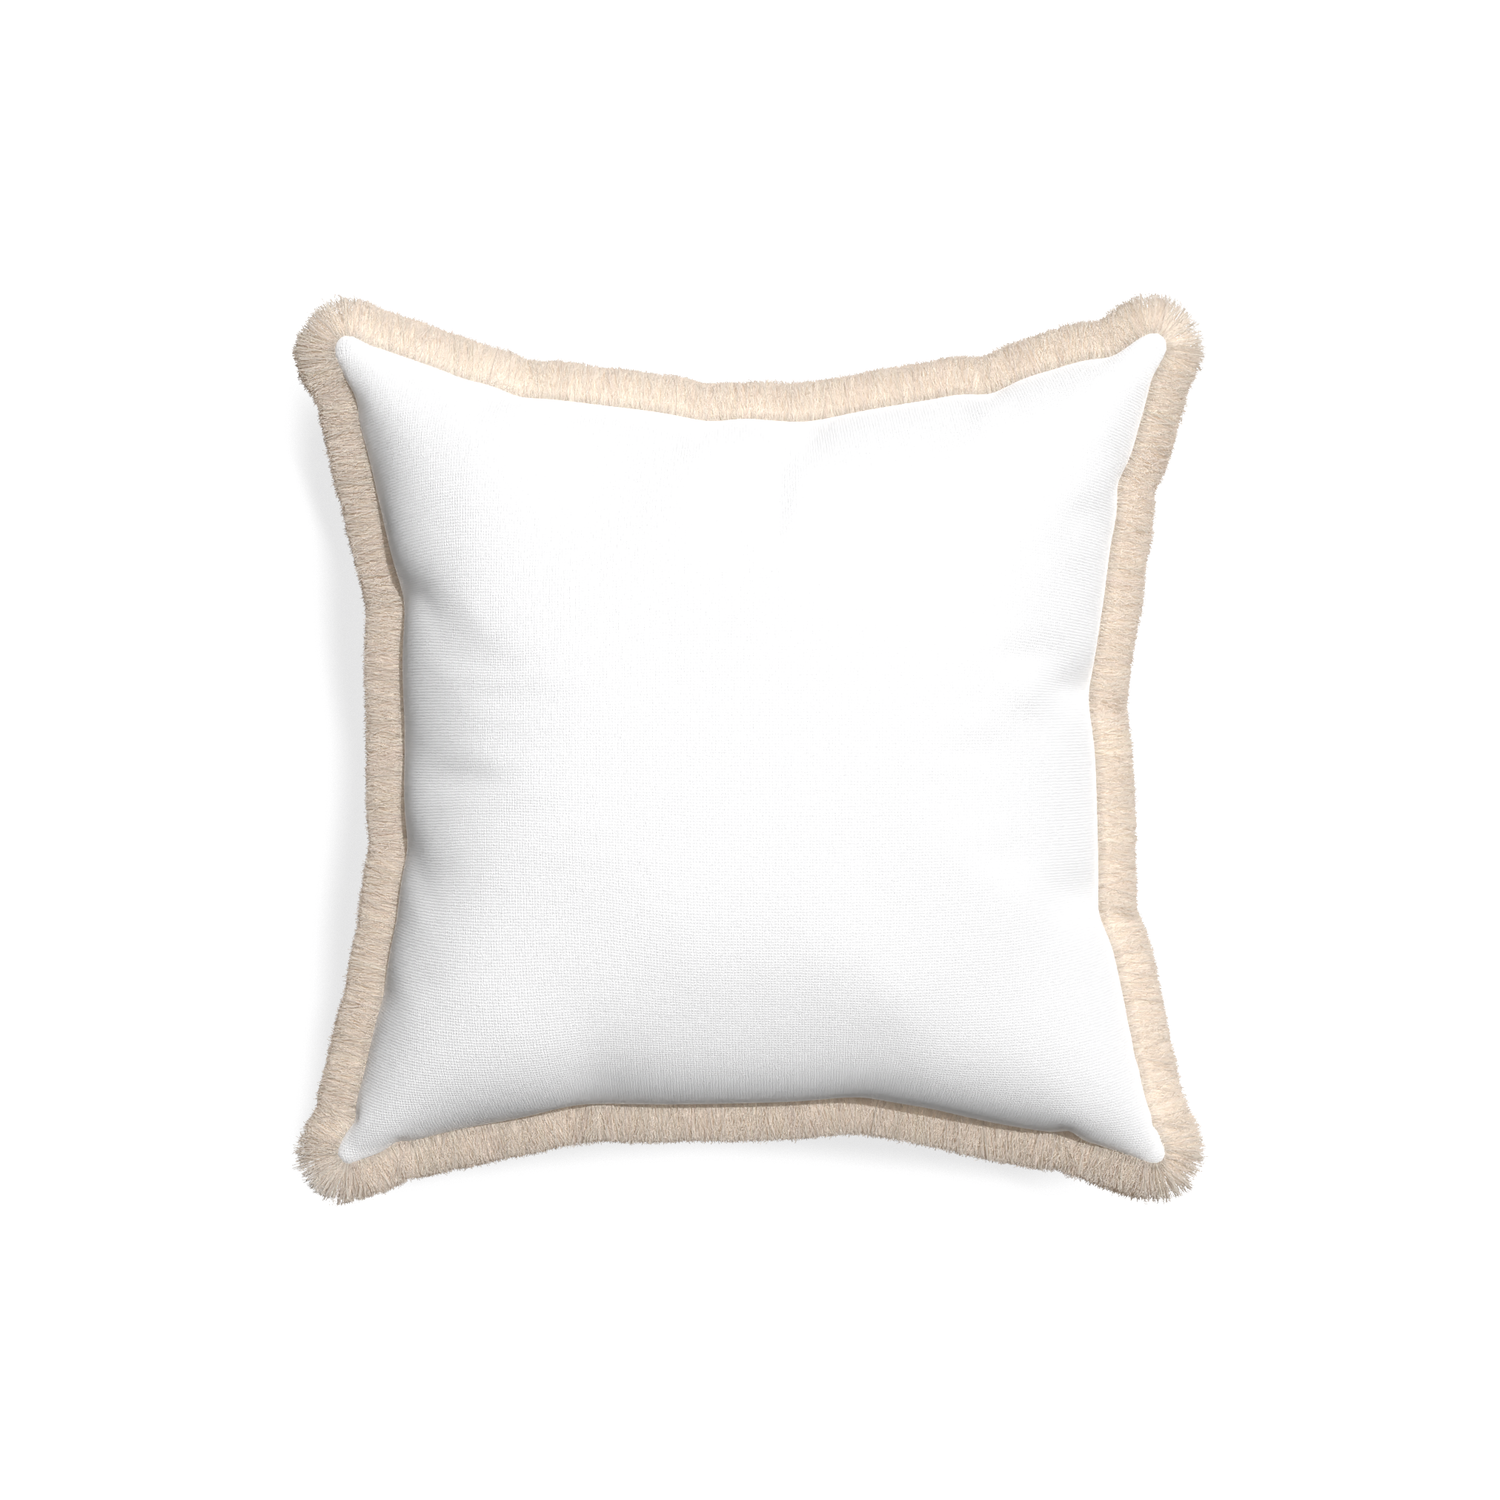 18-square snow custom pillow with cream fringe on white background